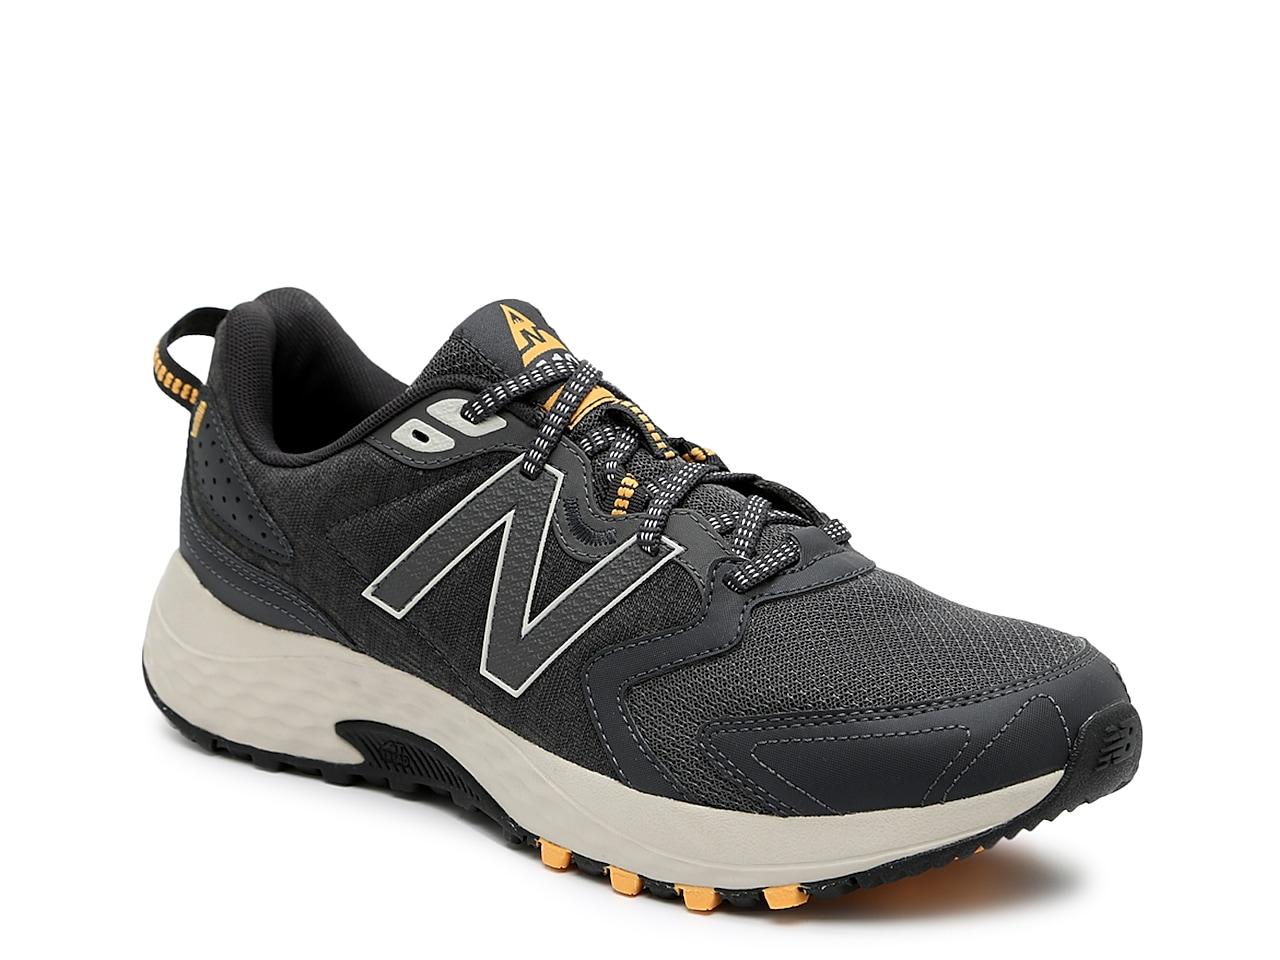 New Balance Synthetic 410 V7 Trail Running Shoe in Charcoal/Yellow/Black  (Black) for Men - Lyst